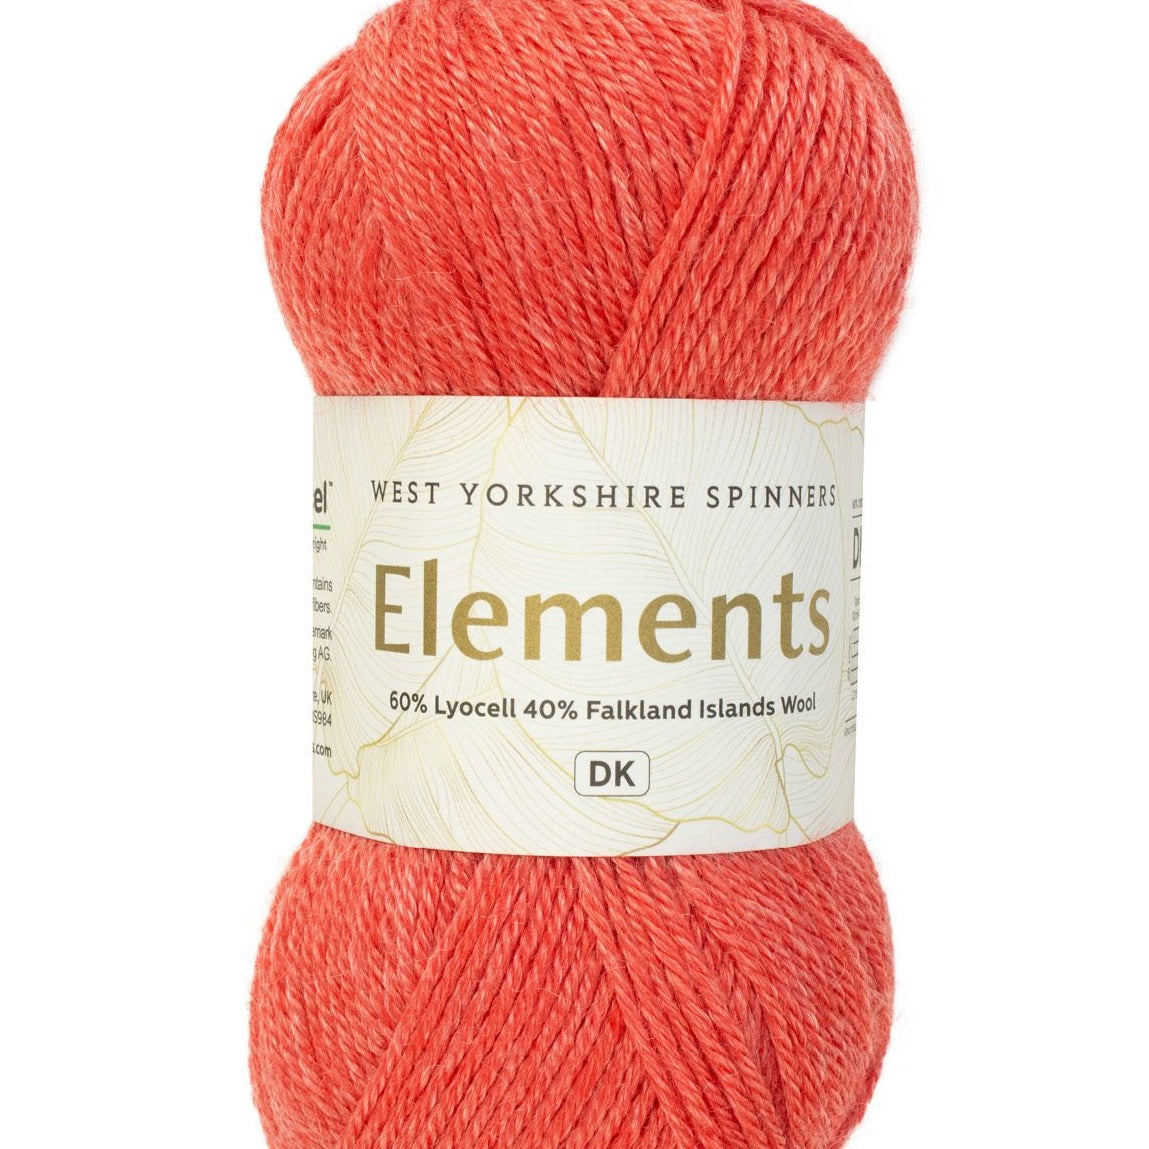 West Yorkshire Spinners Elements Watermelon